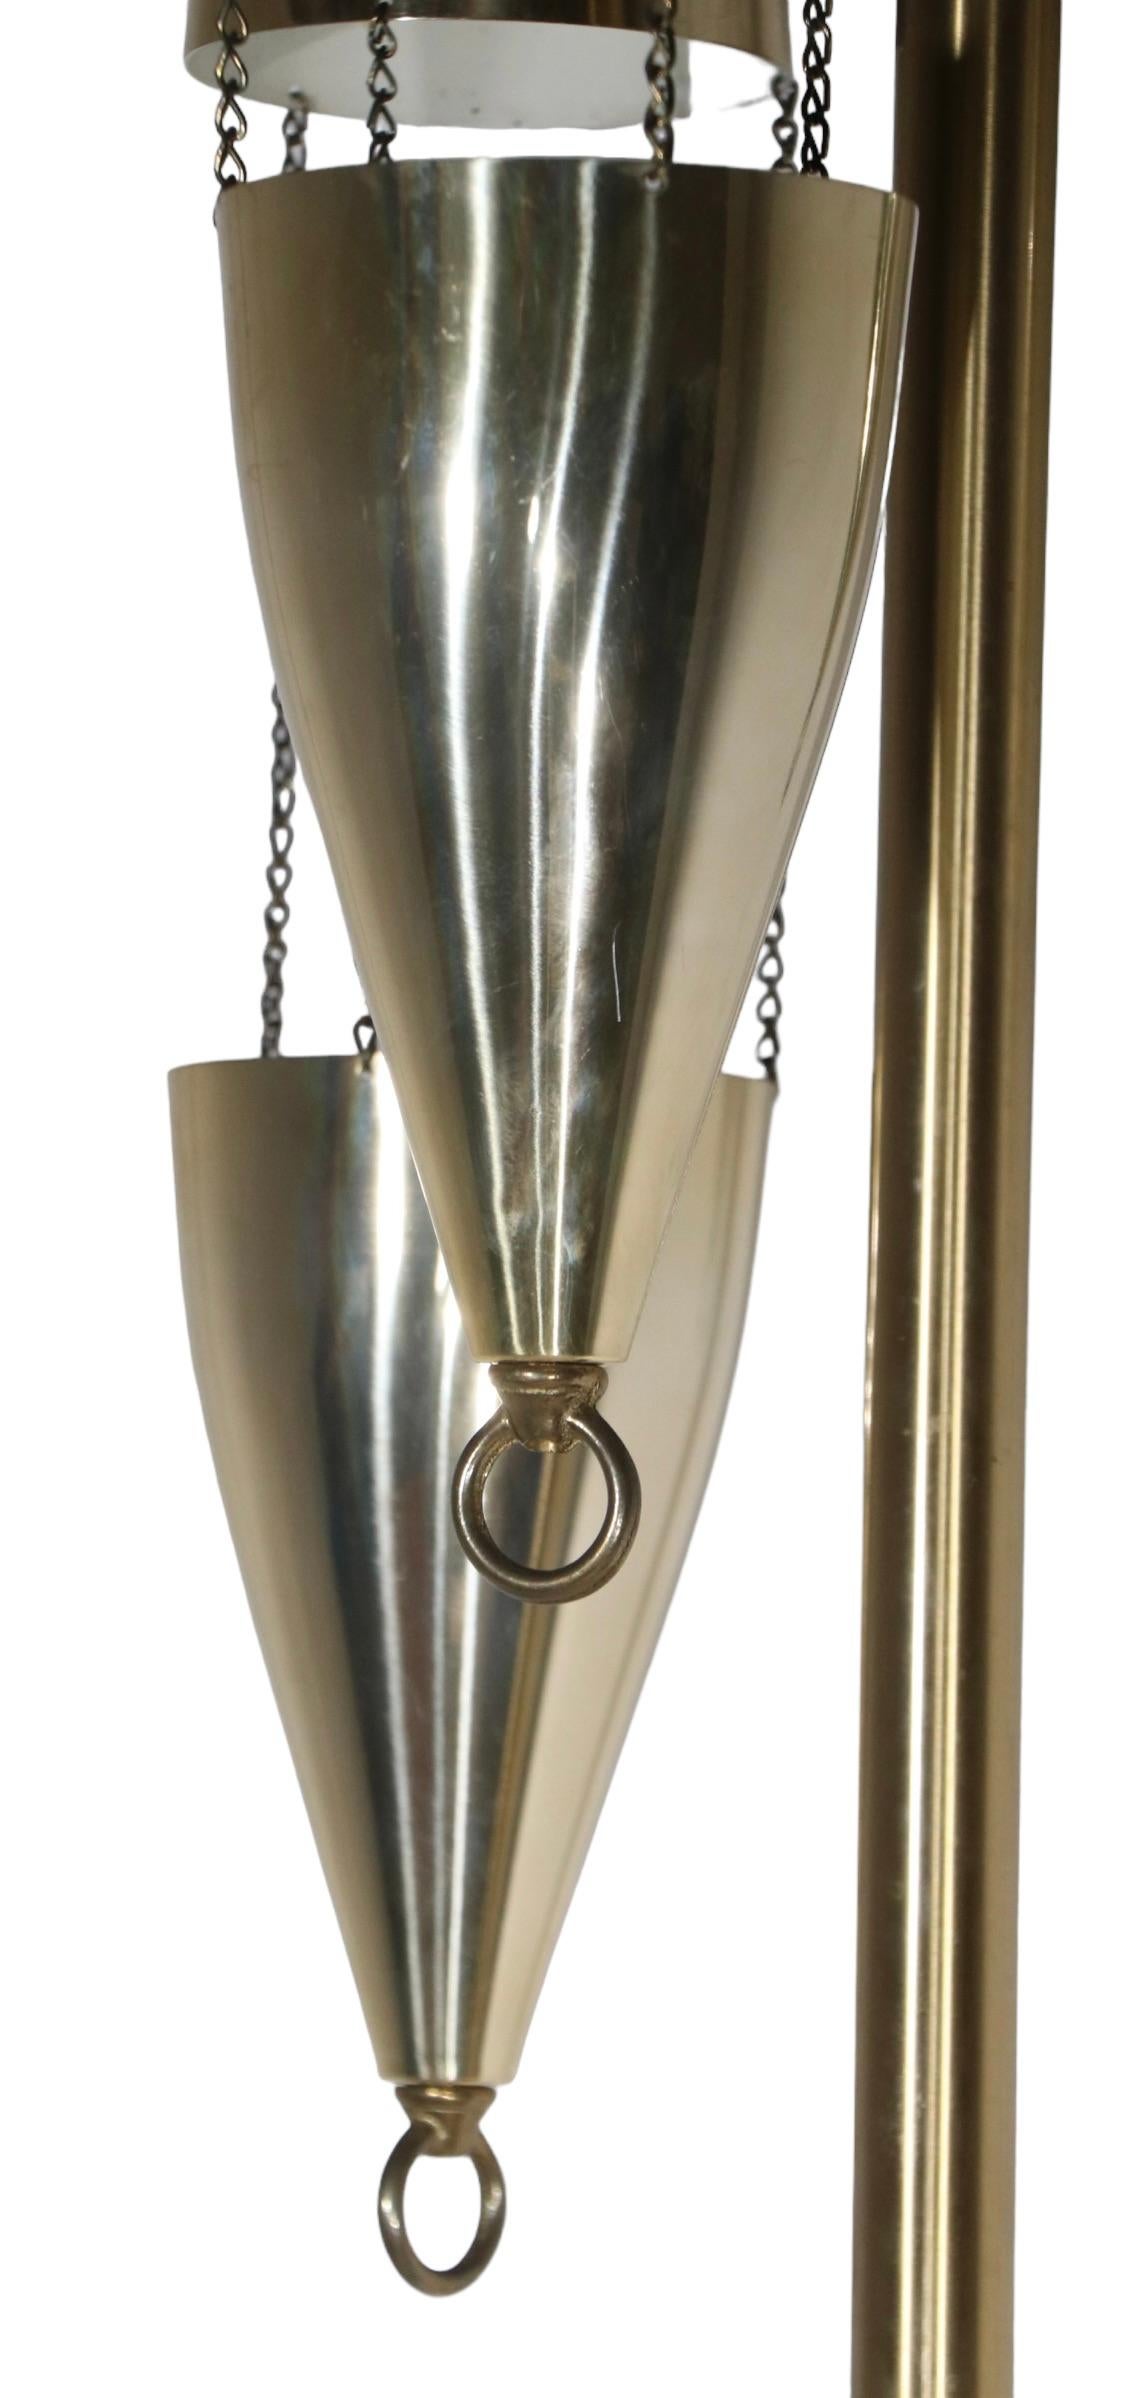 Metal Architectural Mid Century Tension Pole Lamp c 1950- 1960's